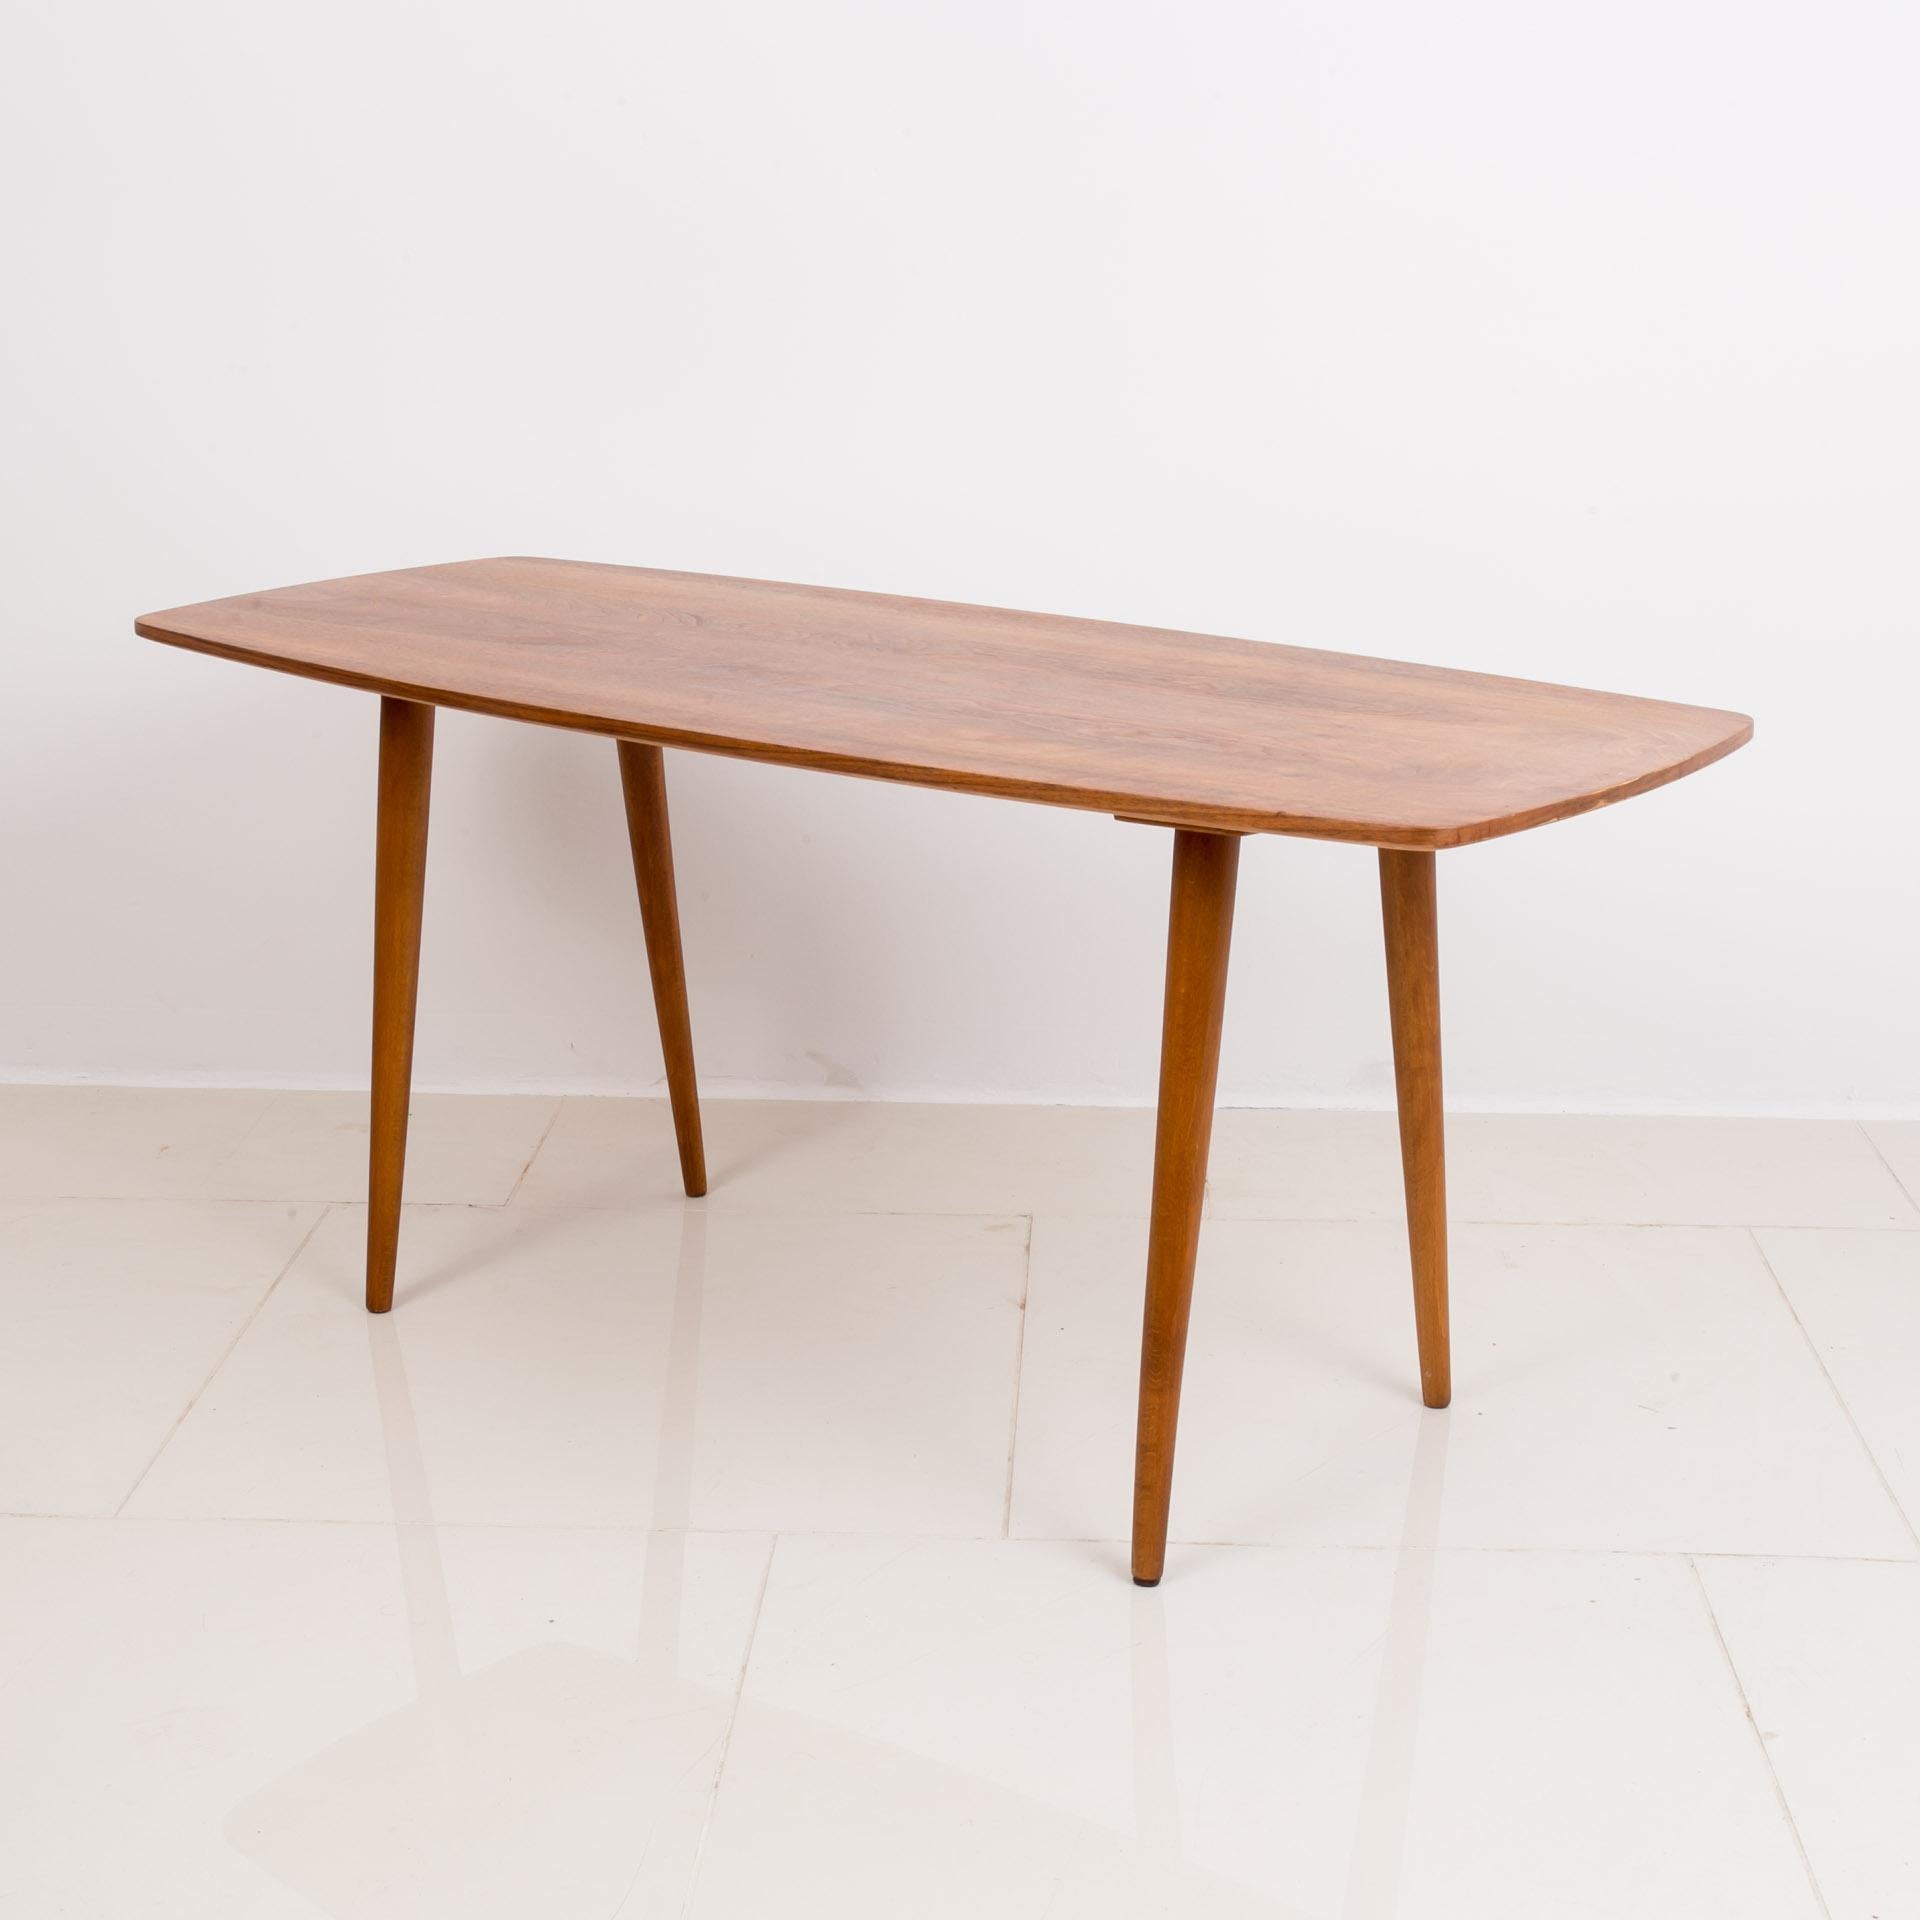 Czech Midcentury Coffee Table, 1950s For Sale